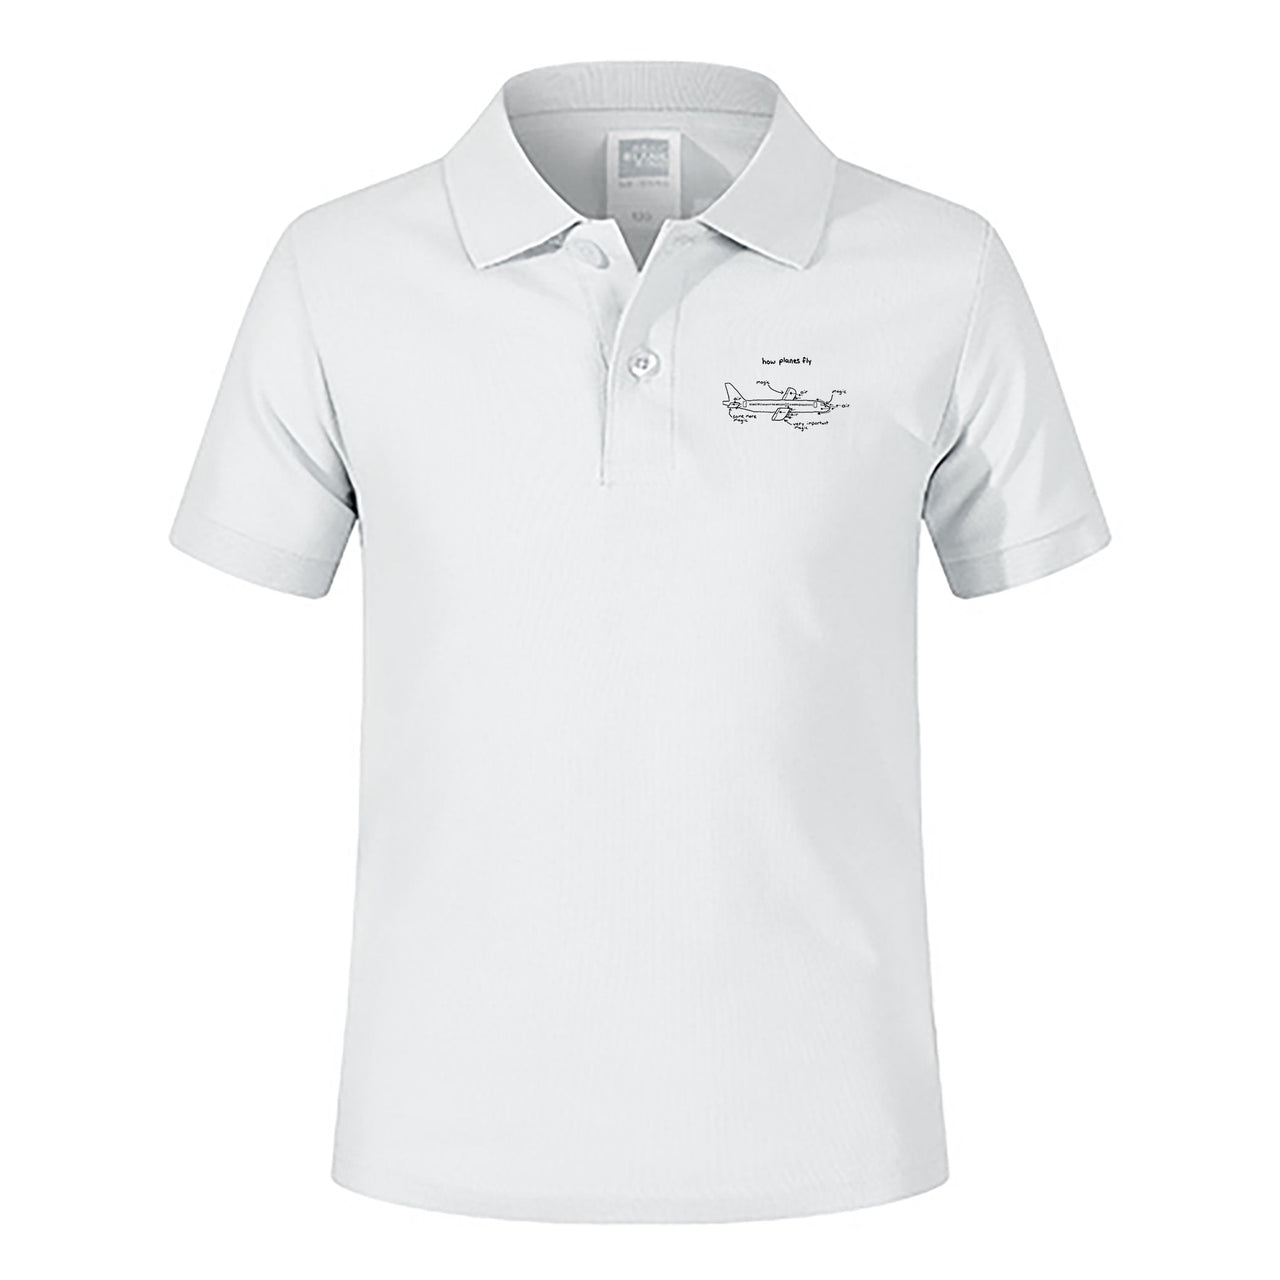 How Planes Fly Designed Children Polo T-Shirts